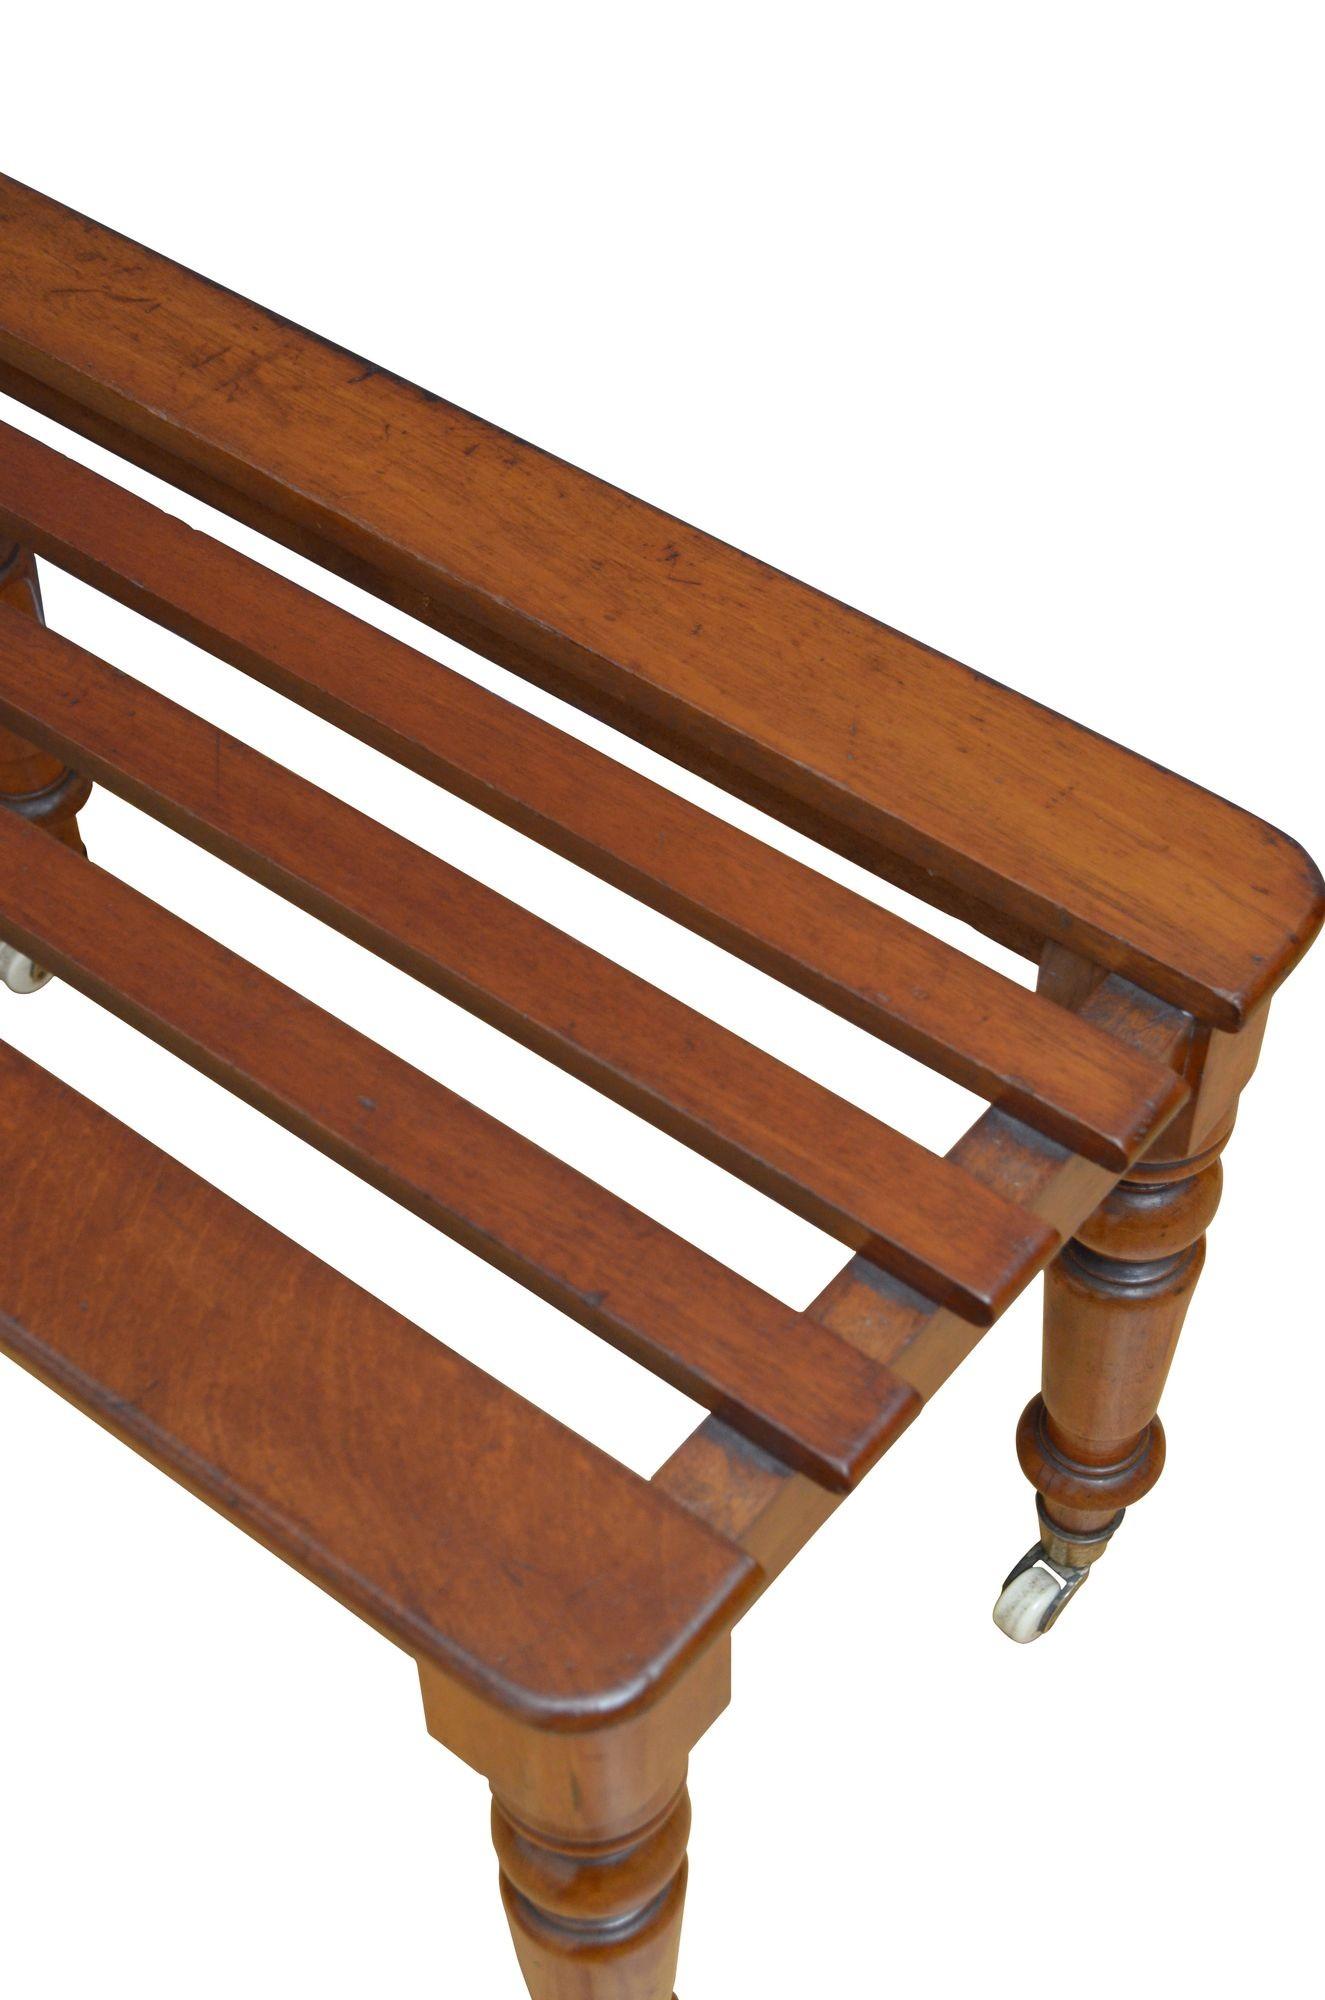 19th Century Superb English Victorian Hall Bench Luggage Rack For Sale